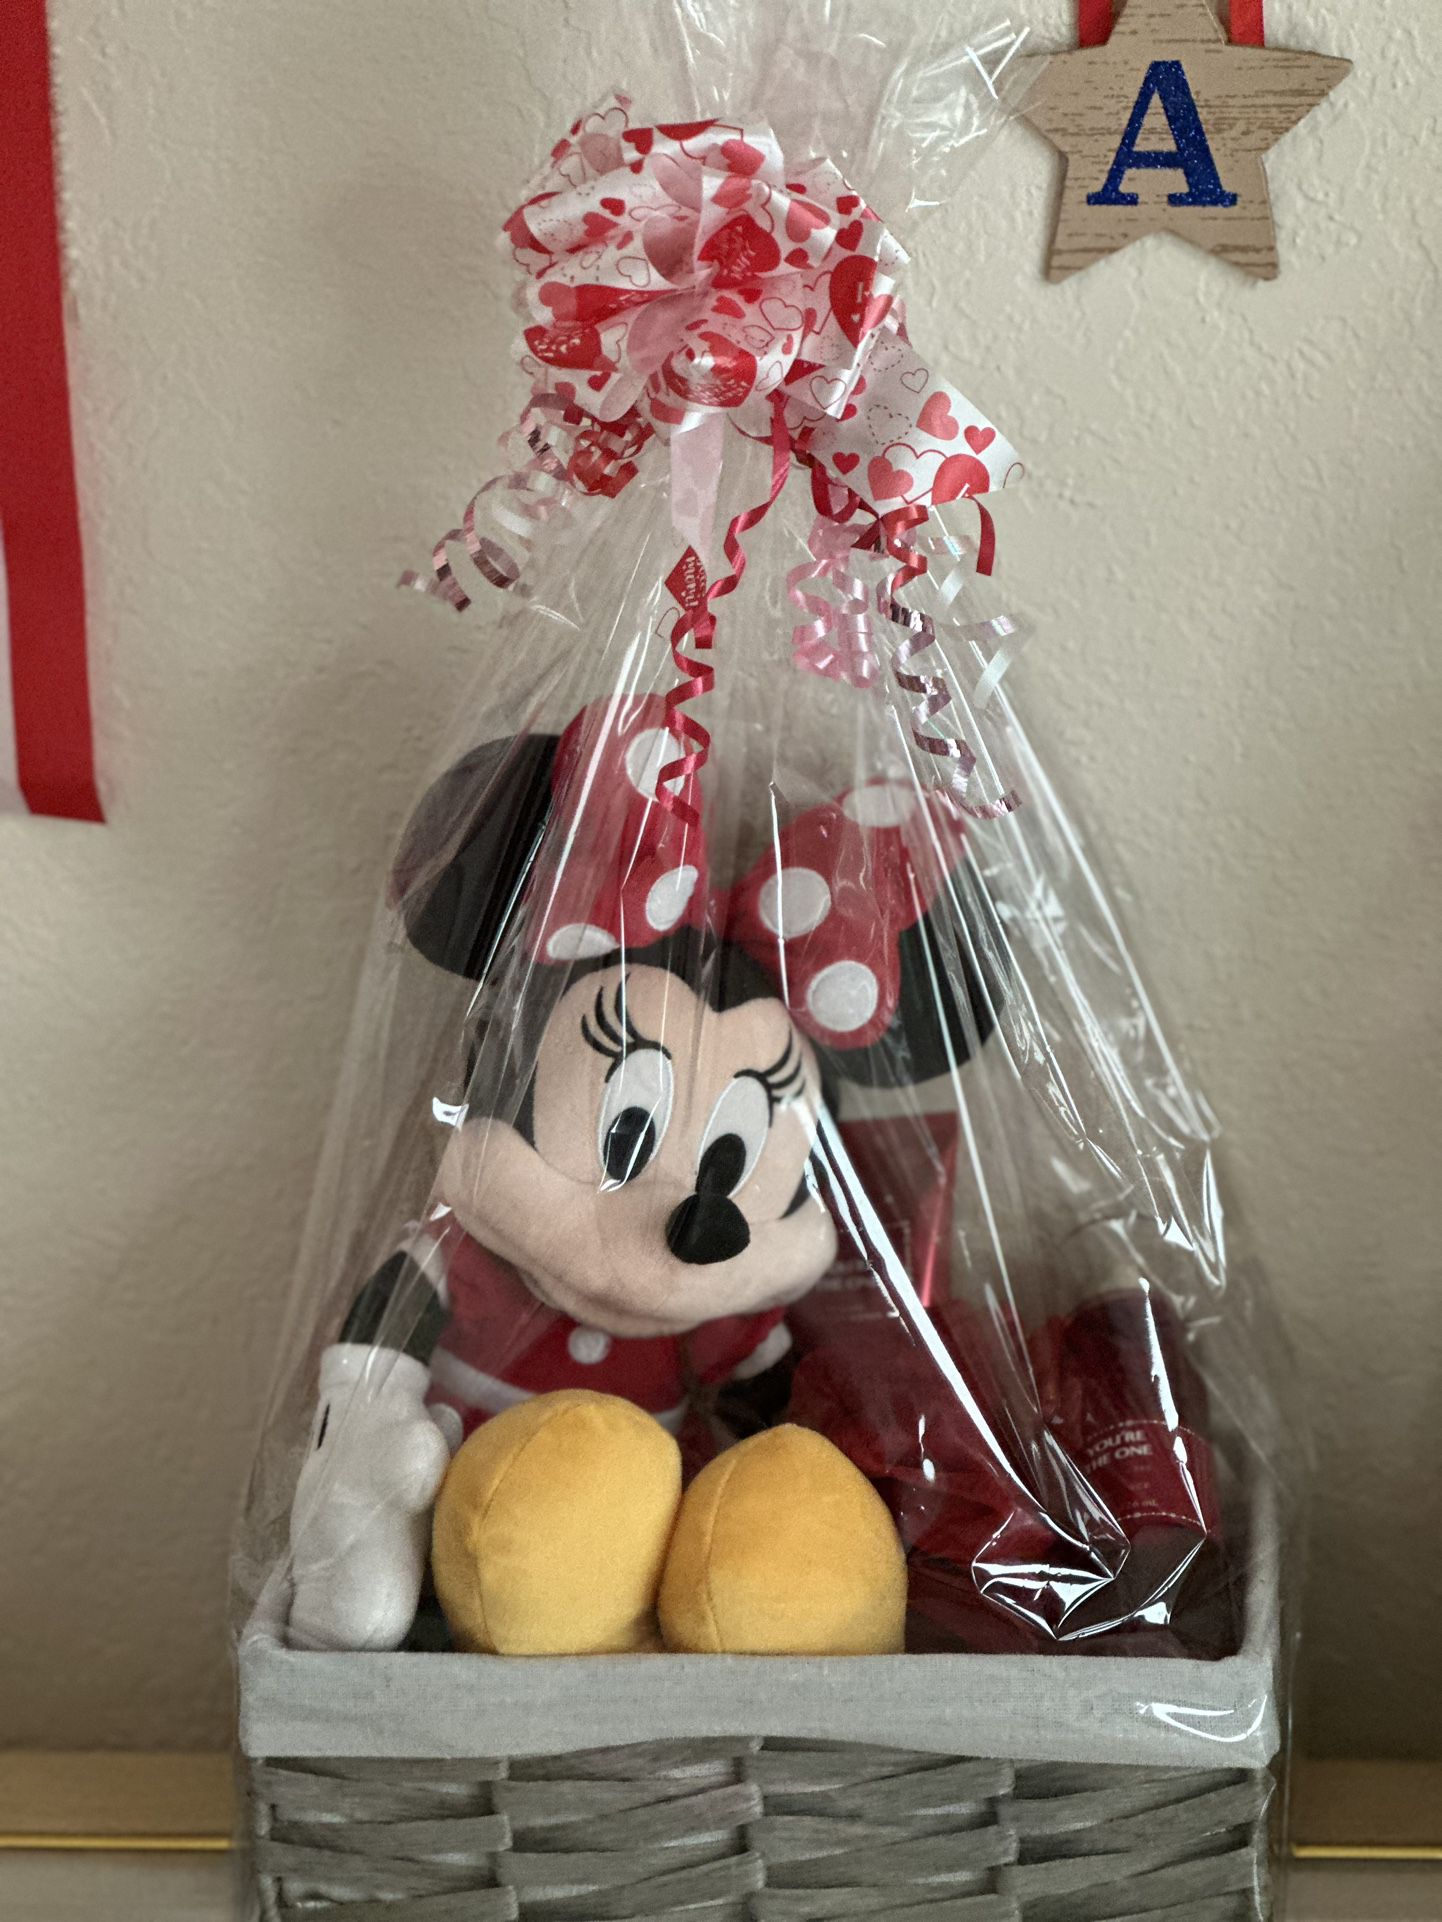 Minnie Mouse Mother’s Day Basket Plush With You’re the One Set Cream & Splash 